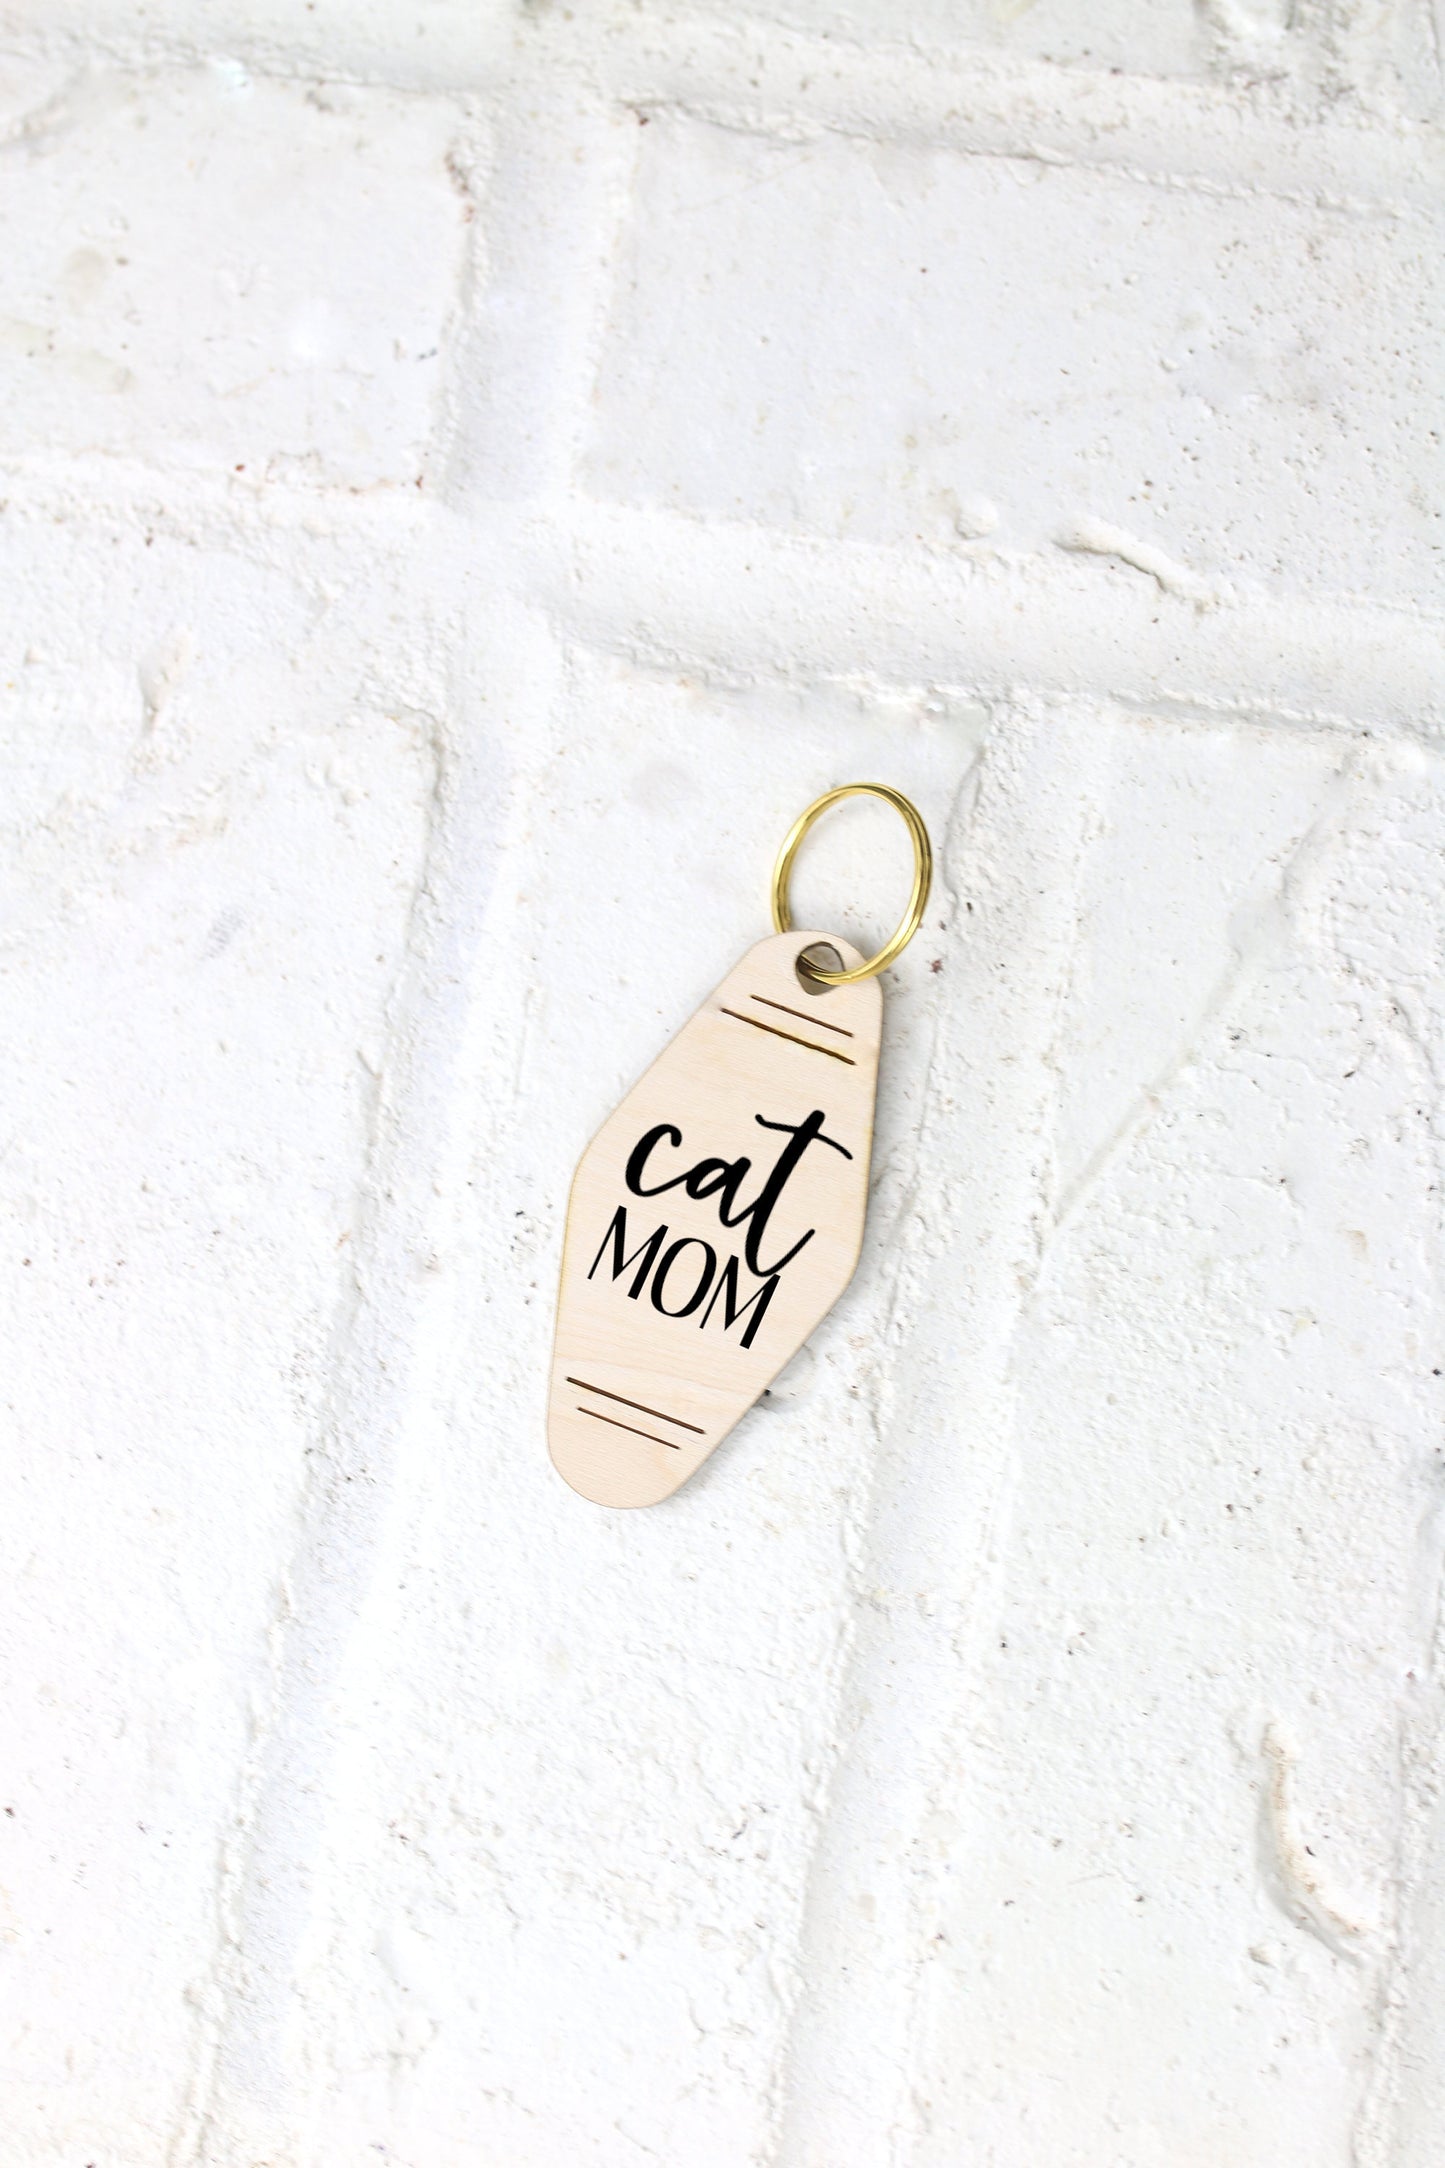 Cat Mom Engraved Wood Motel Keychain, Cat Owner Gift, Cat Lover